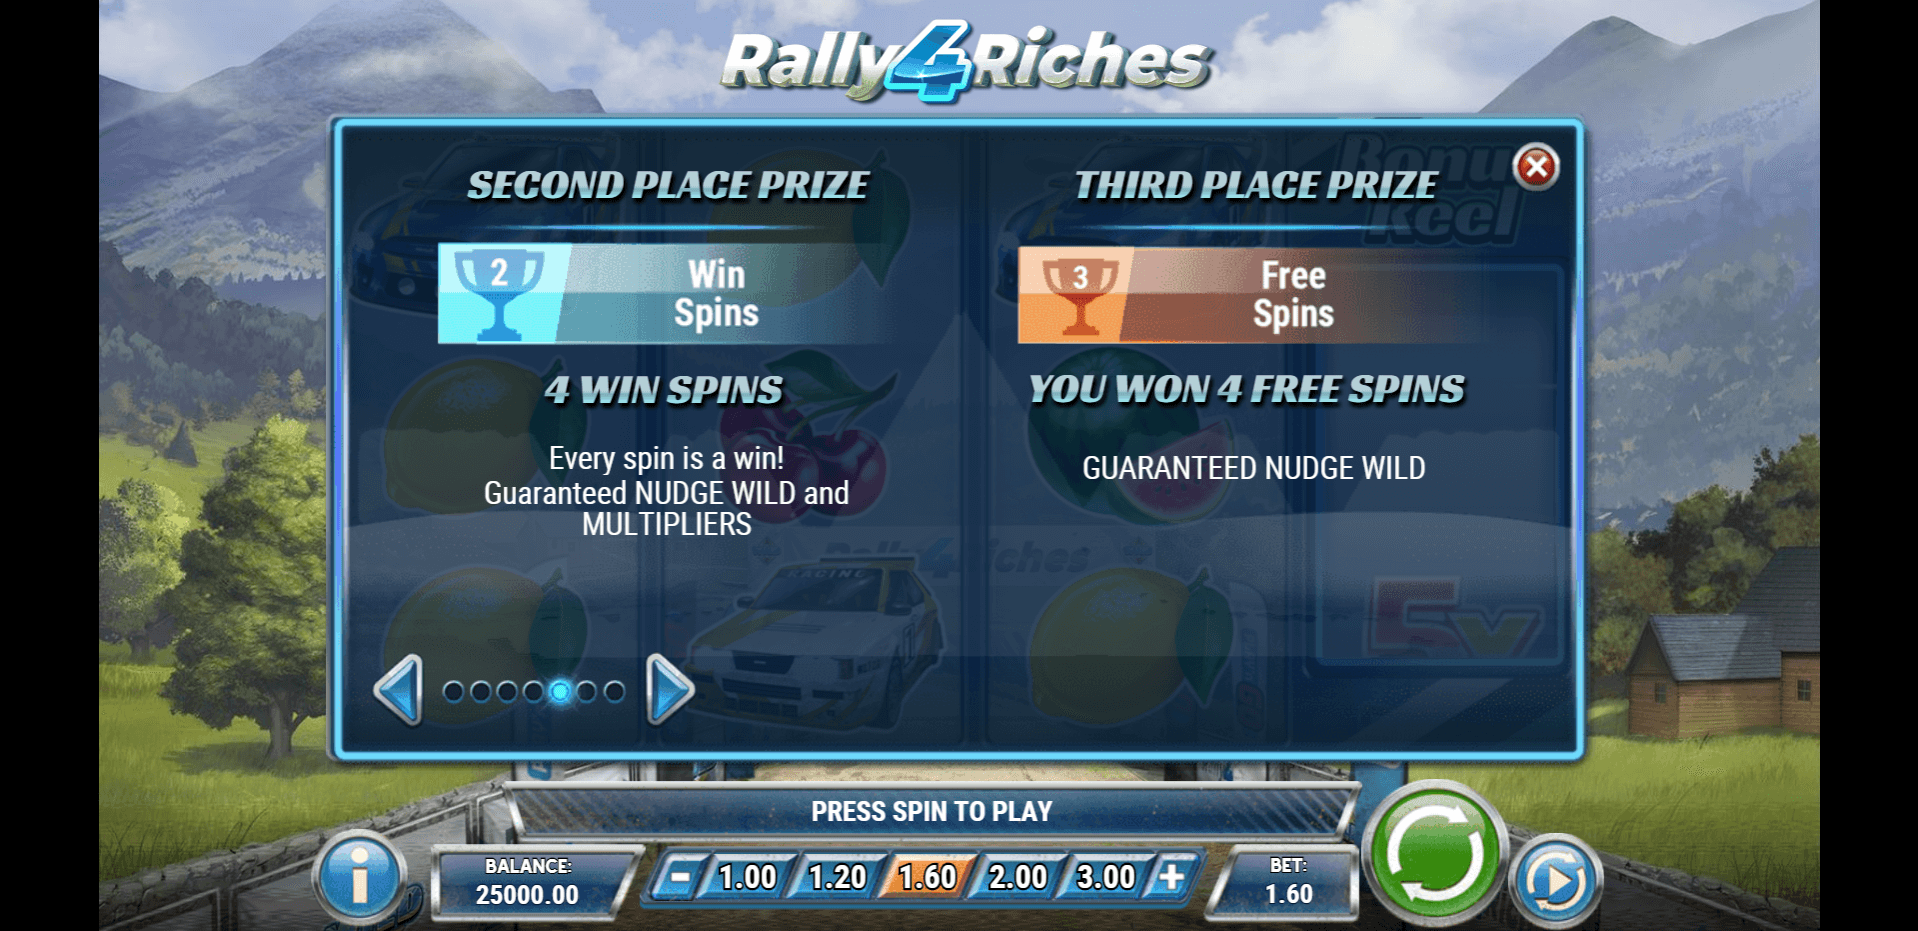 rally 4 riches slot machine detail image 4